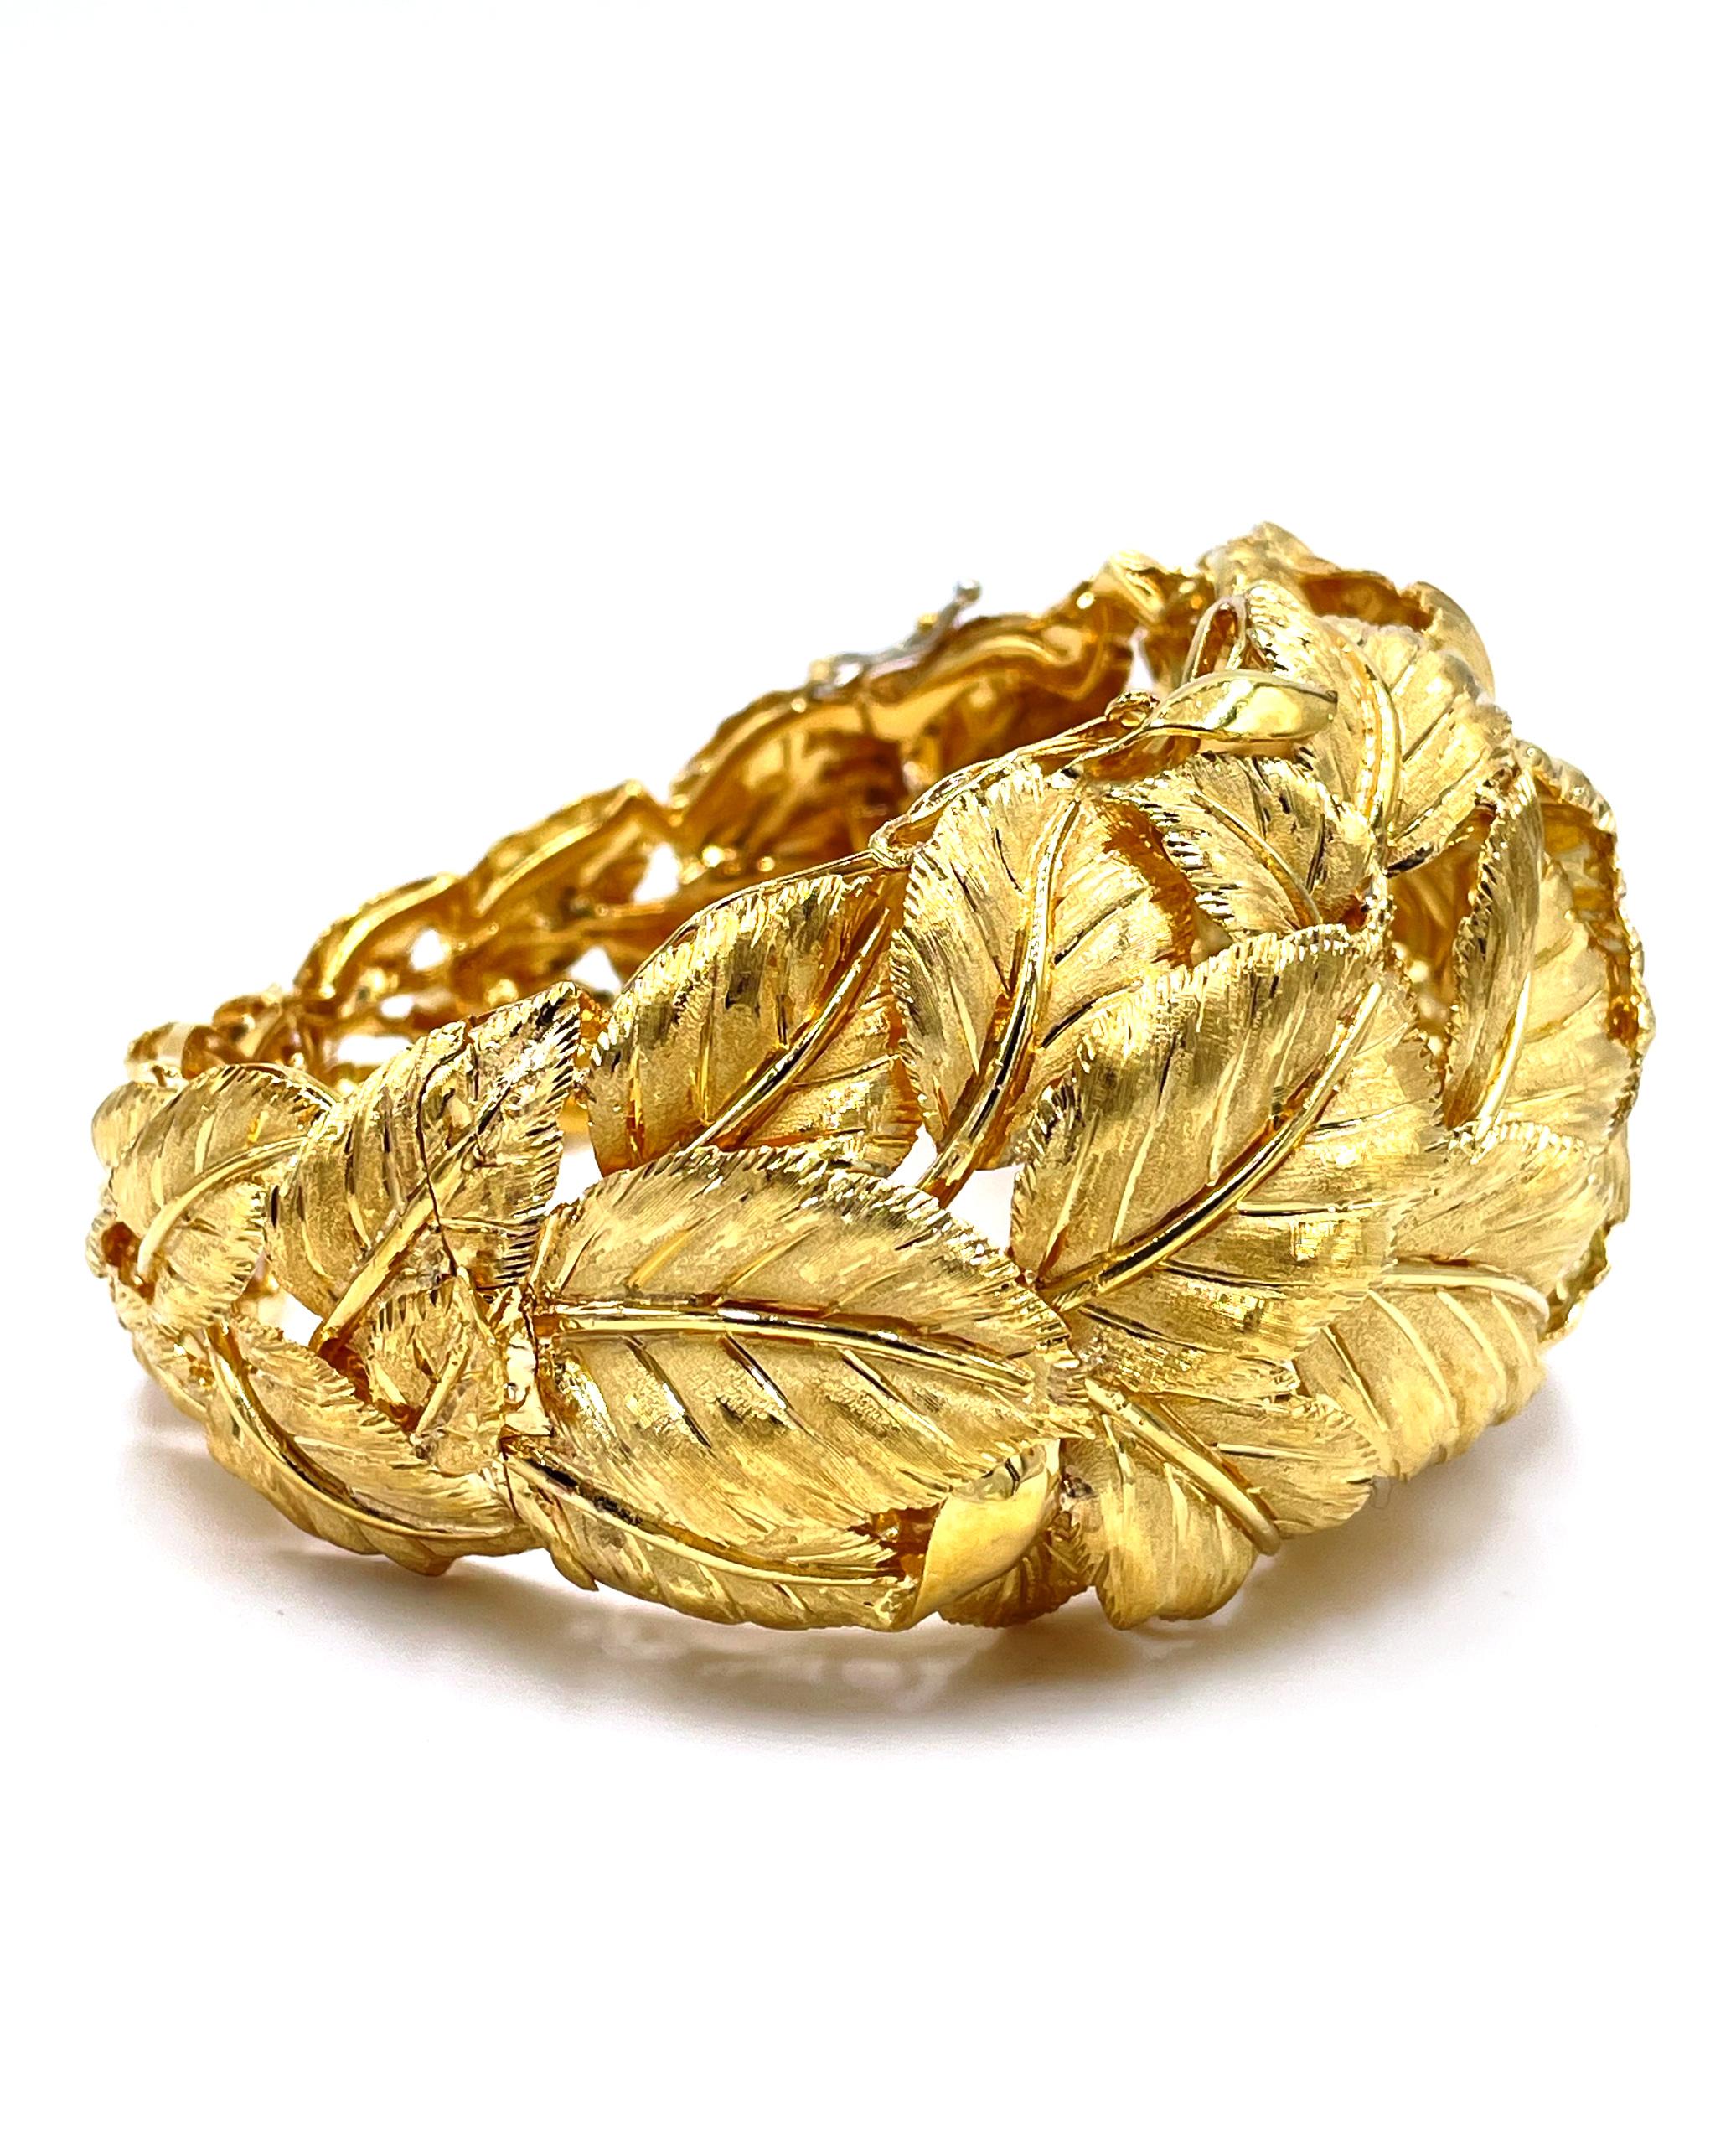 Preowned Vintage 18K Yellow Gold Italian Leaf Wide Statement Bracelet In Excellent Condition For Sale In Old Tappan, NJ